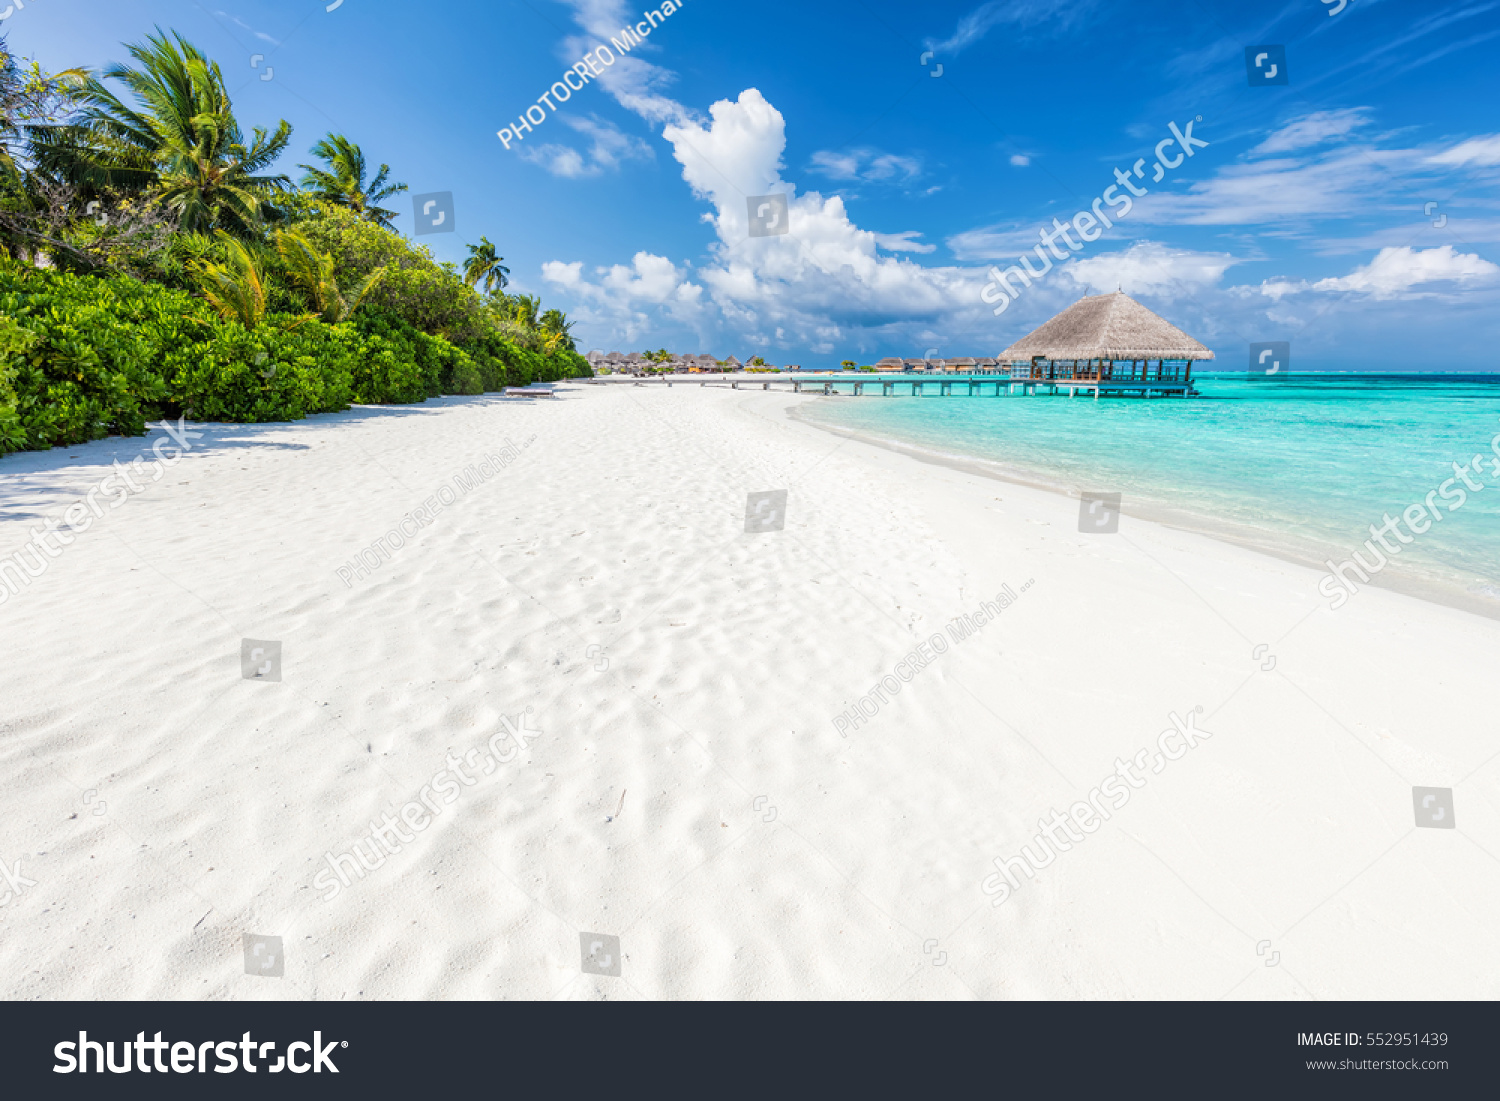 Wide sandy beach on a tropical island in Maldives. Coconut palms and water lodge on Indian Ocean. #552951439